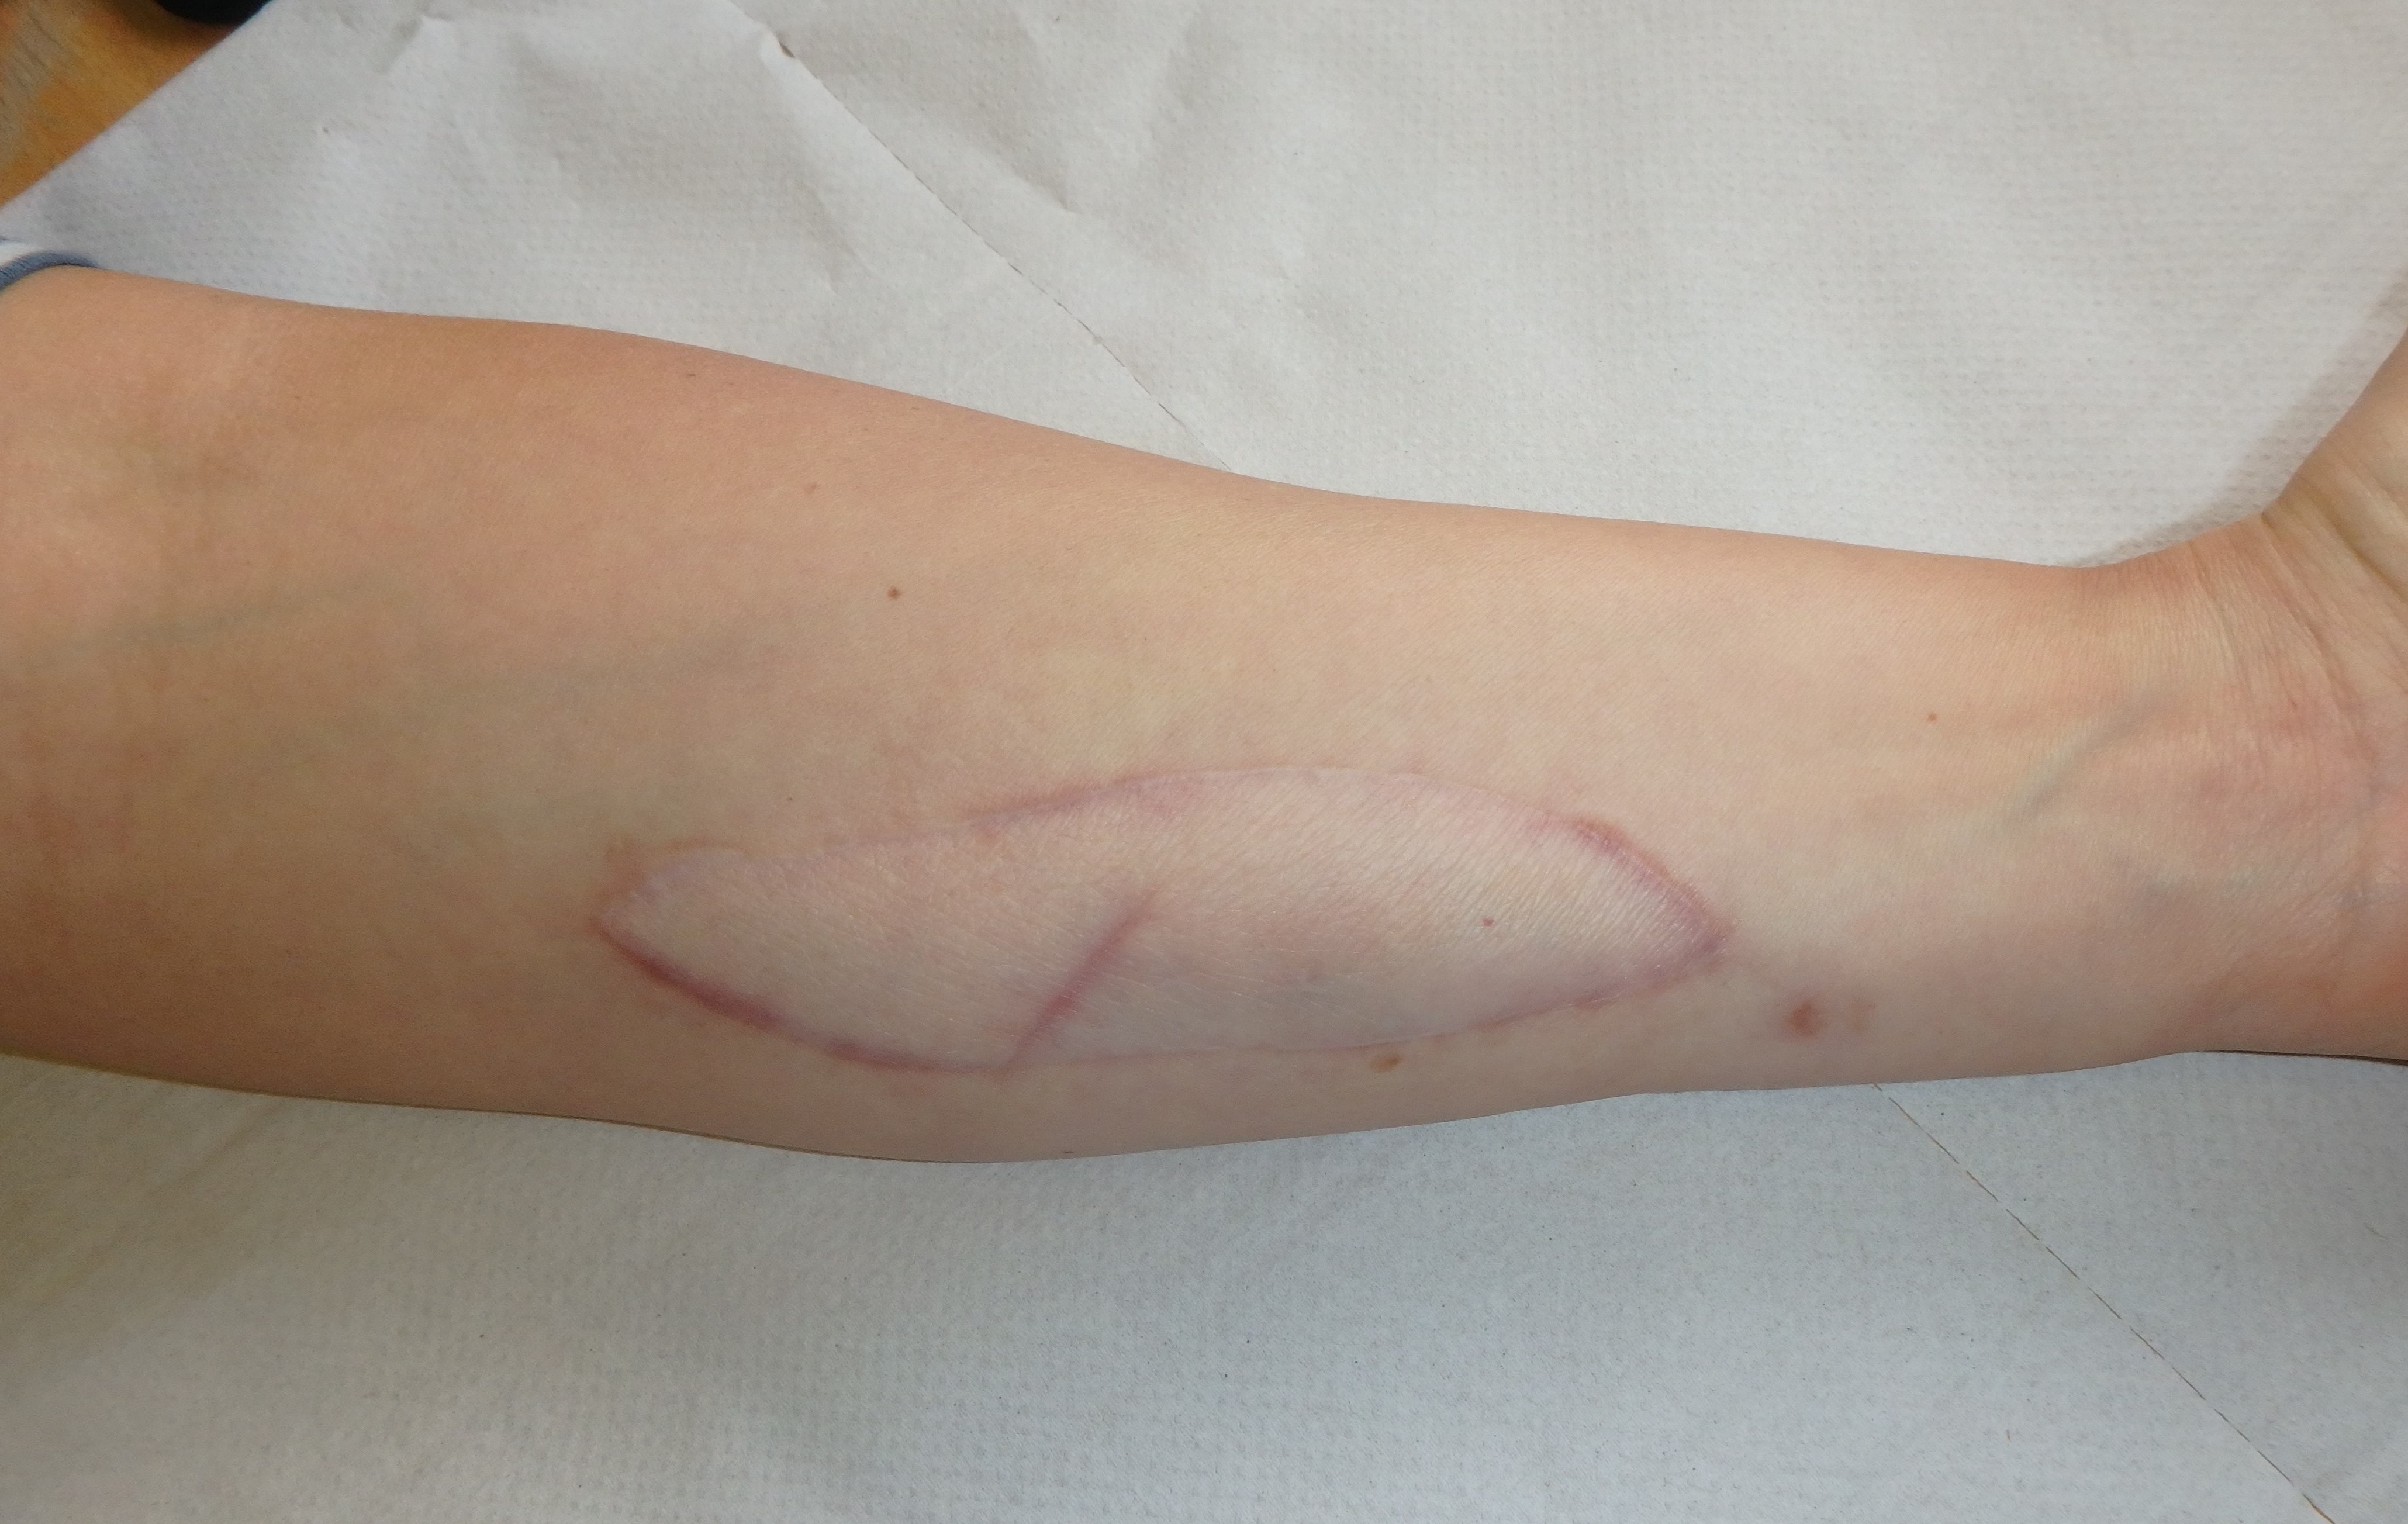 Skin patch from the forearm of the organ donor which is transplanted onto the under-surface of the patient's forearm